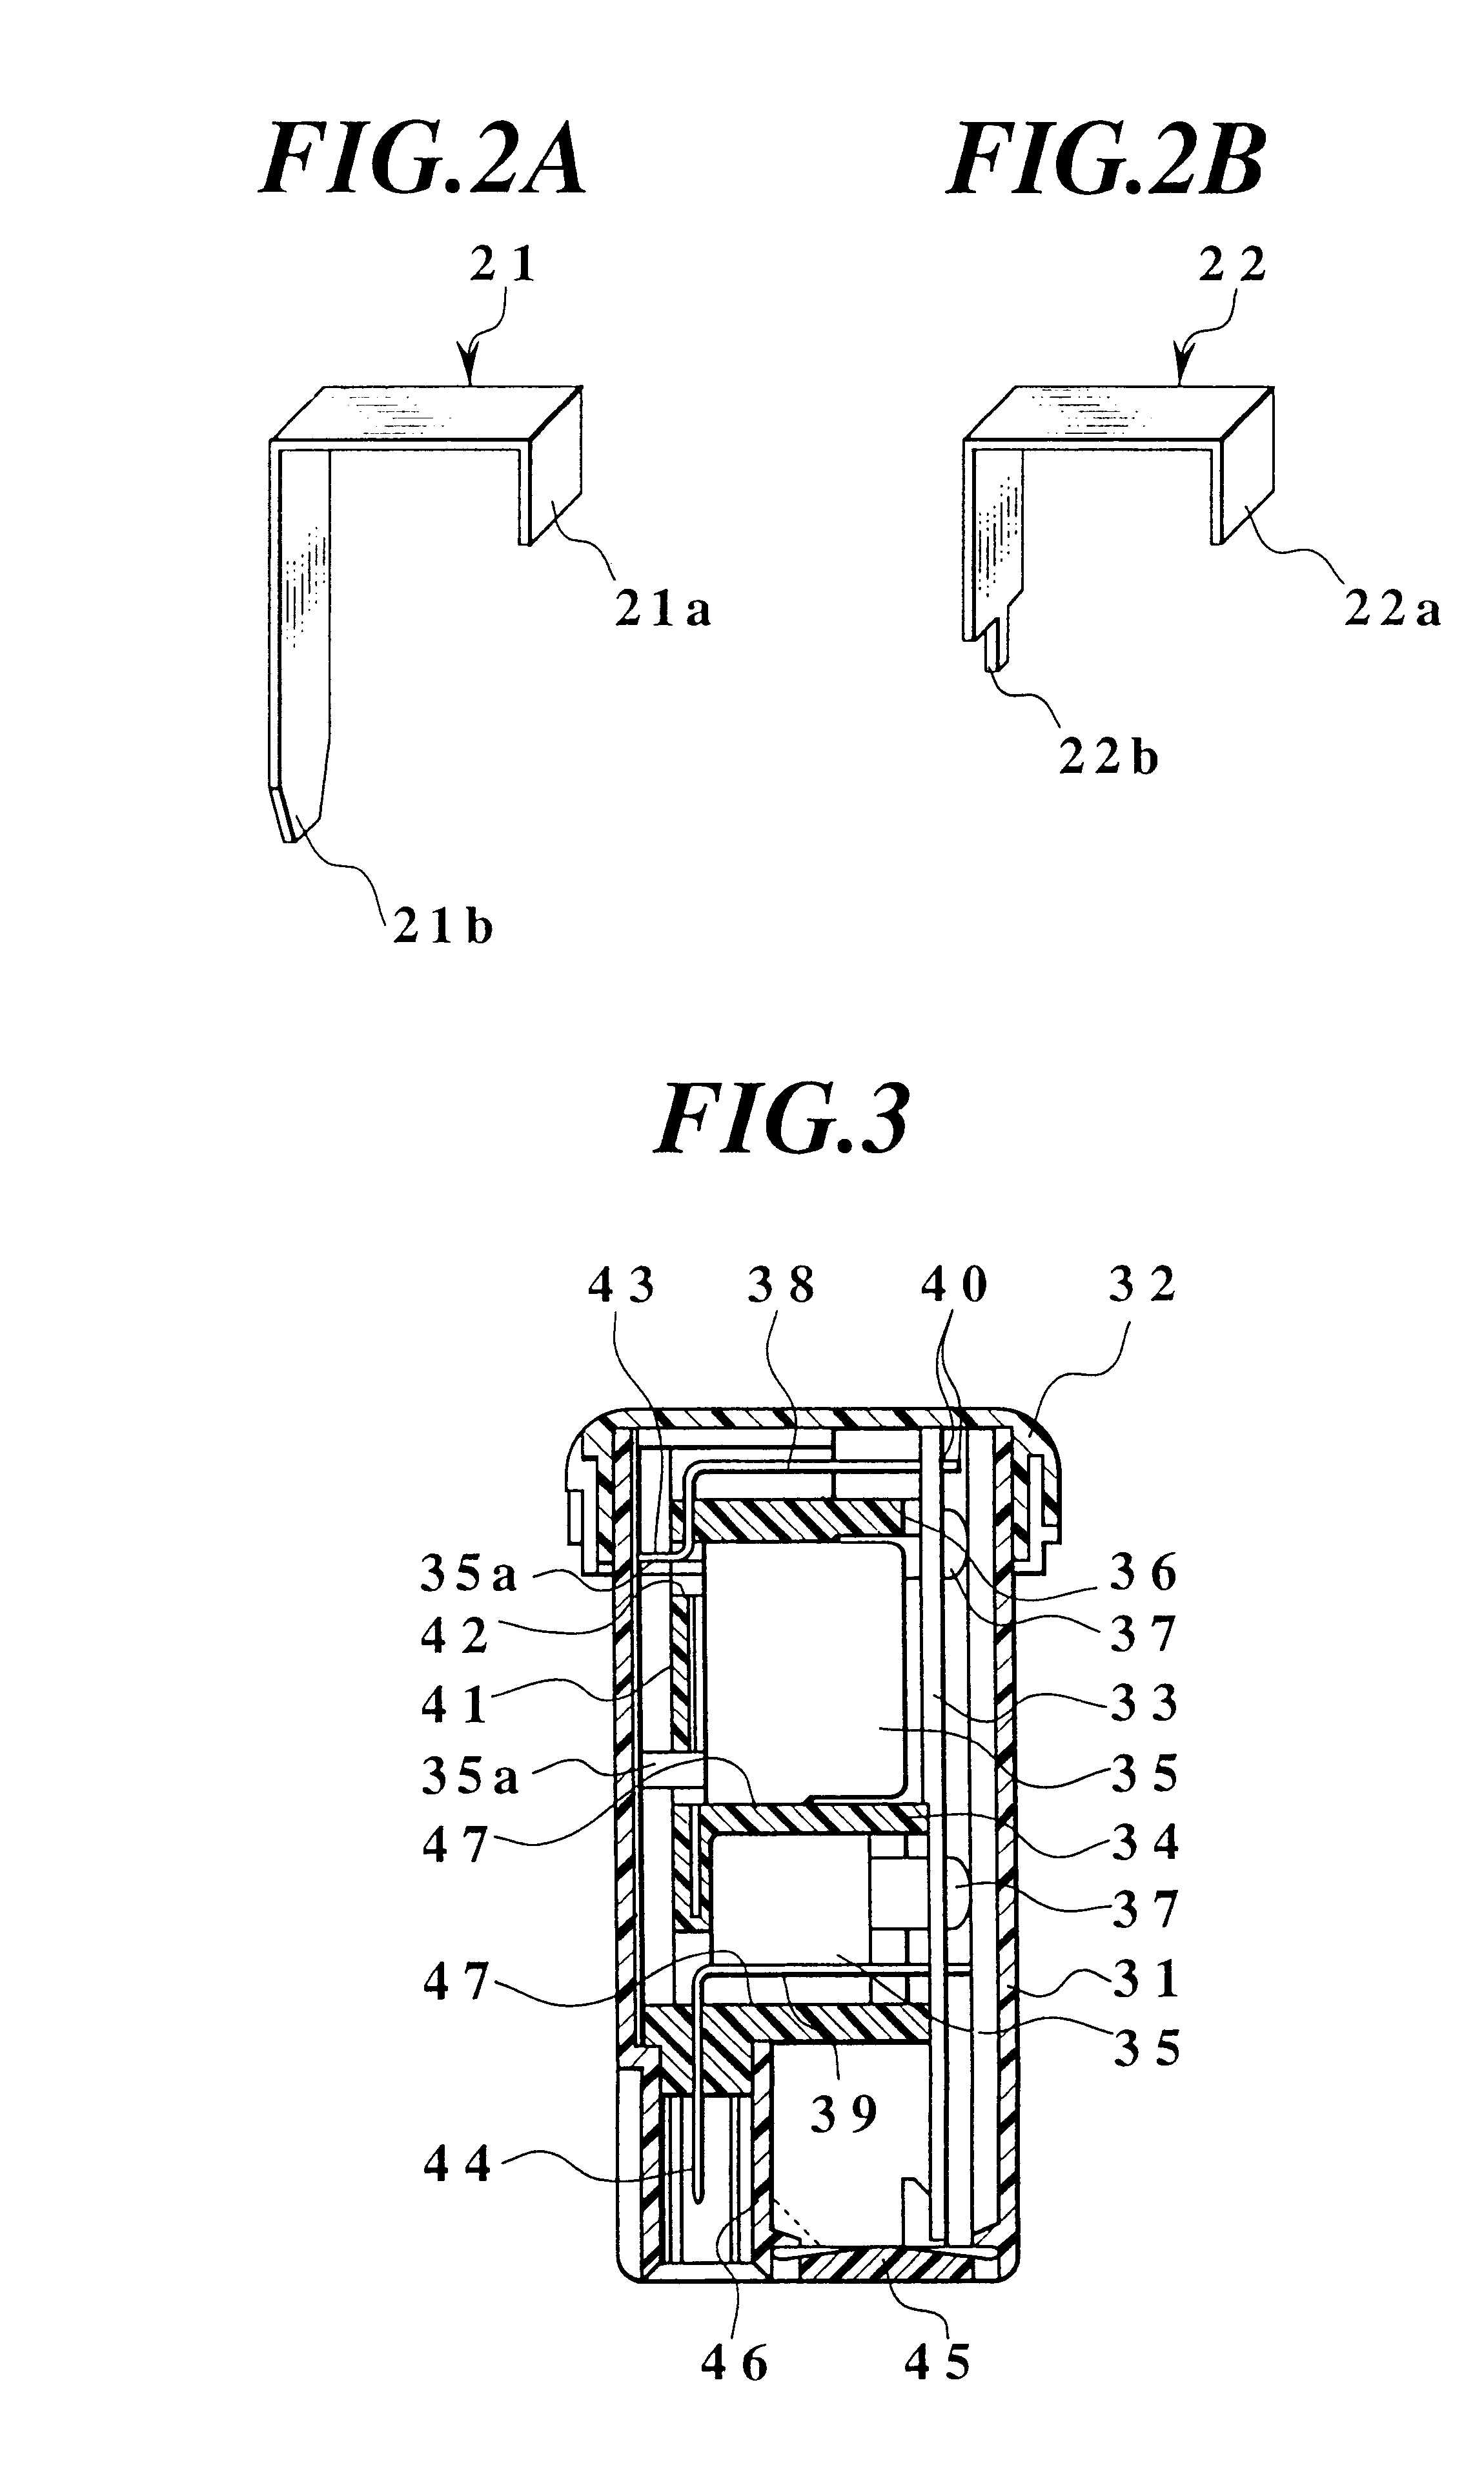 Mounting structure for a relay arranged on a printed circuit board